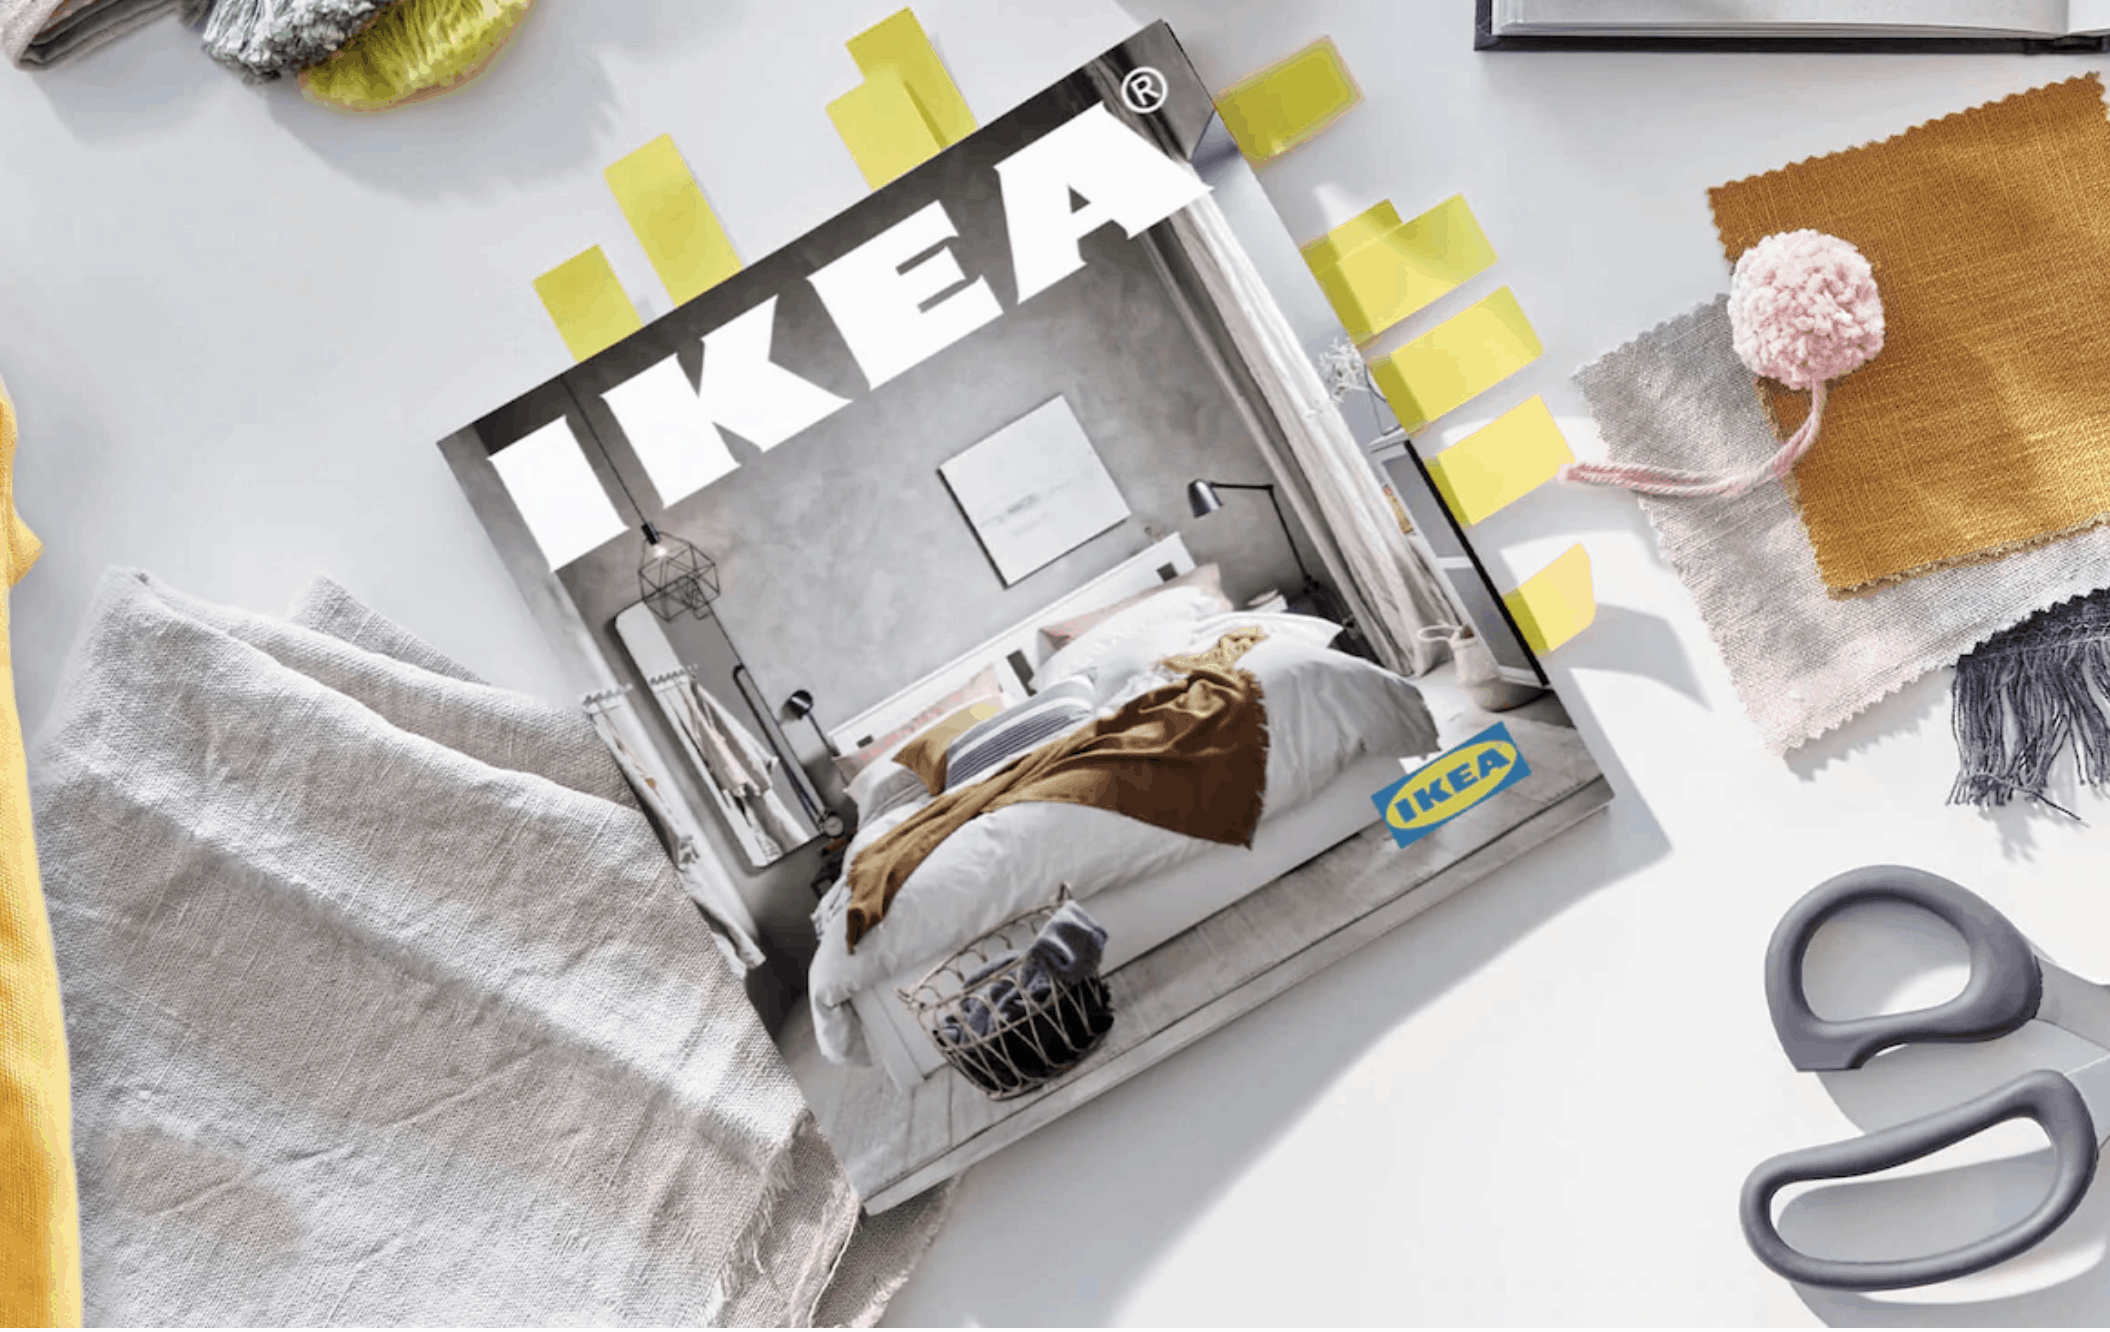 IKEA Shopping Secrets that will give you the Absolute best Deals and Prices